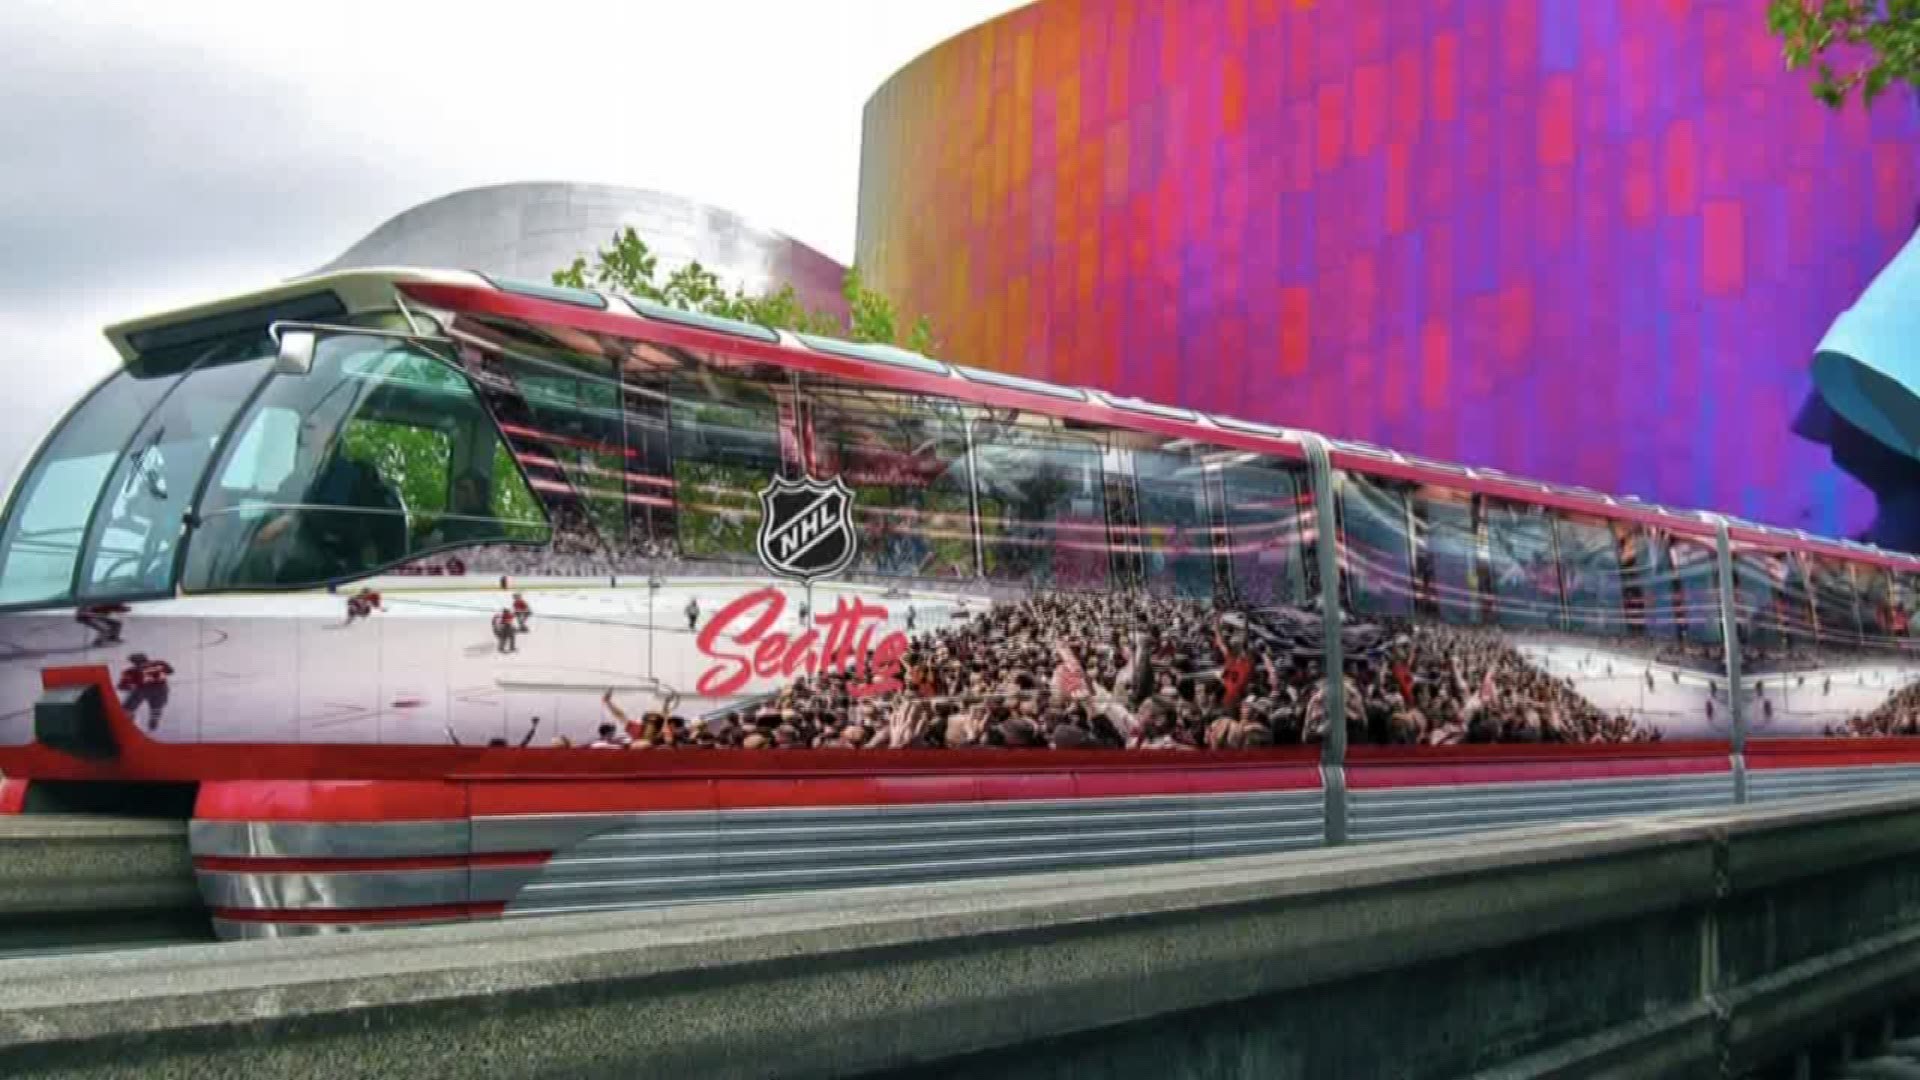 The announcement is part of the first phase of the new NHL franchise’s transportation plan to get fans to and from the new arena at Seattle Center.